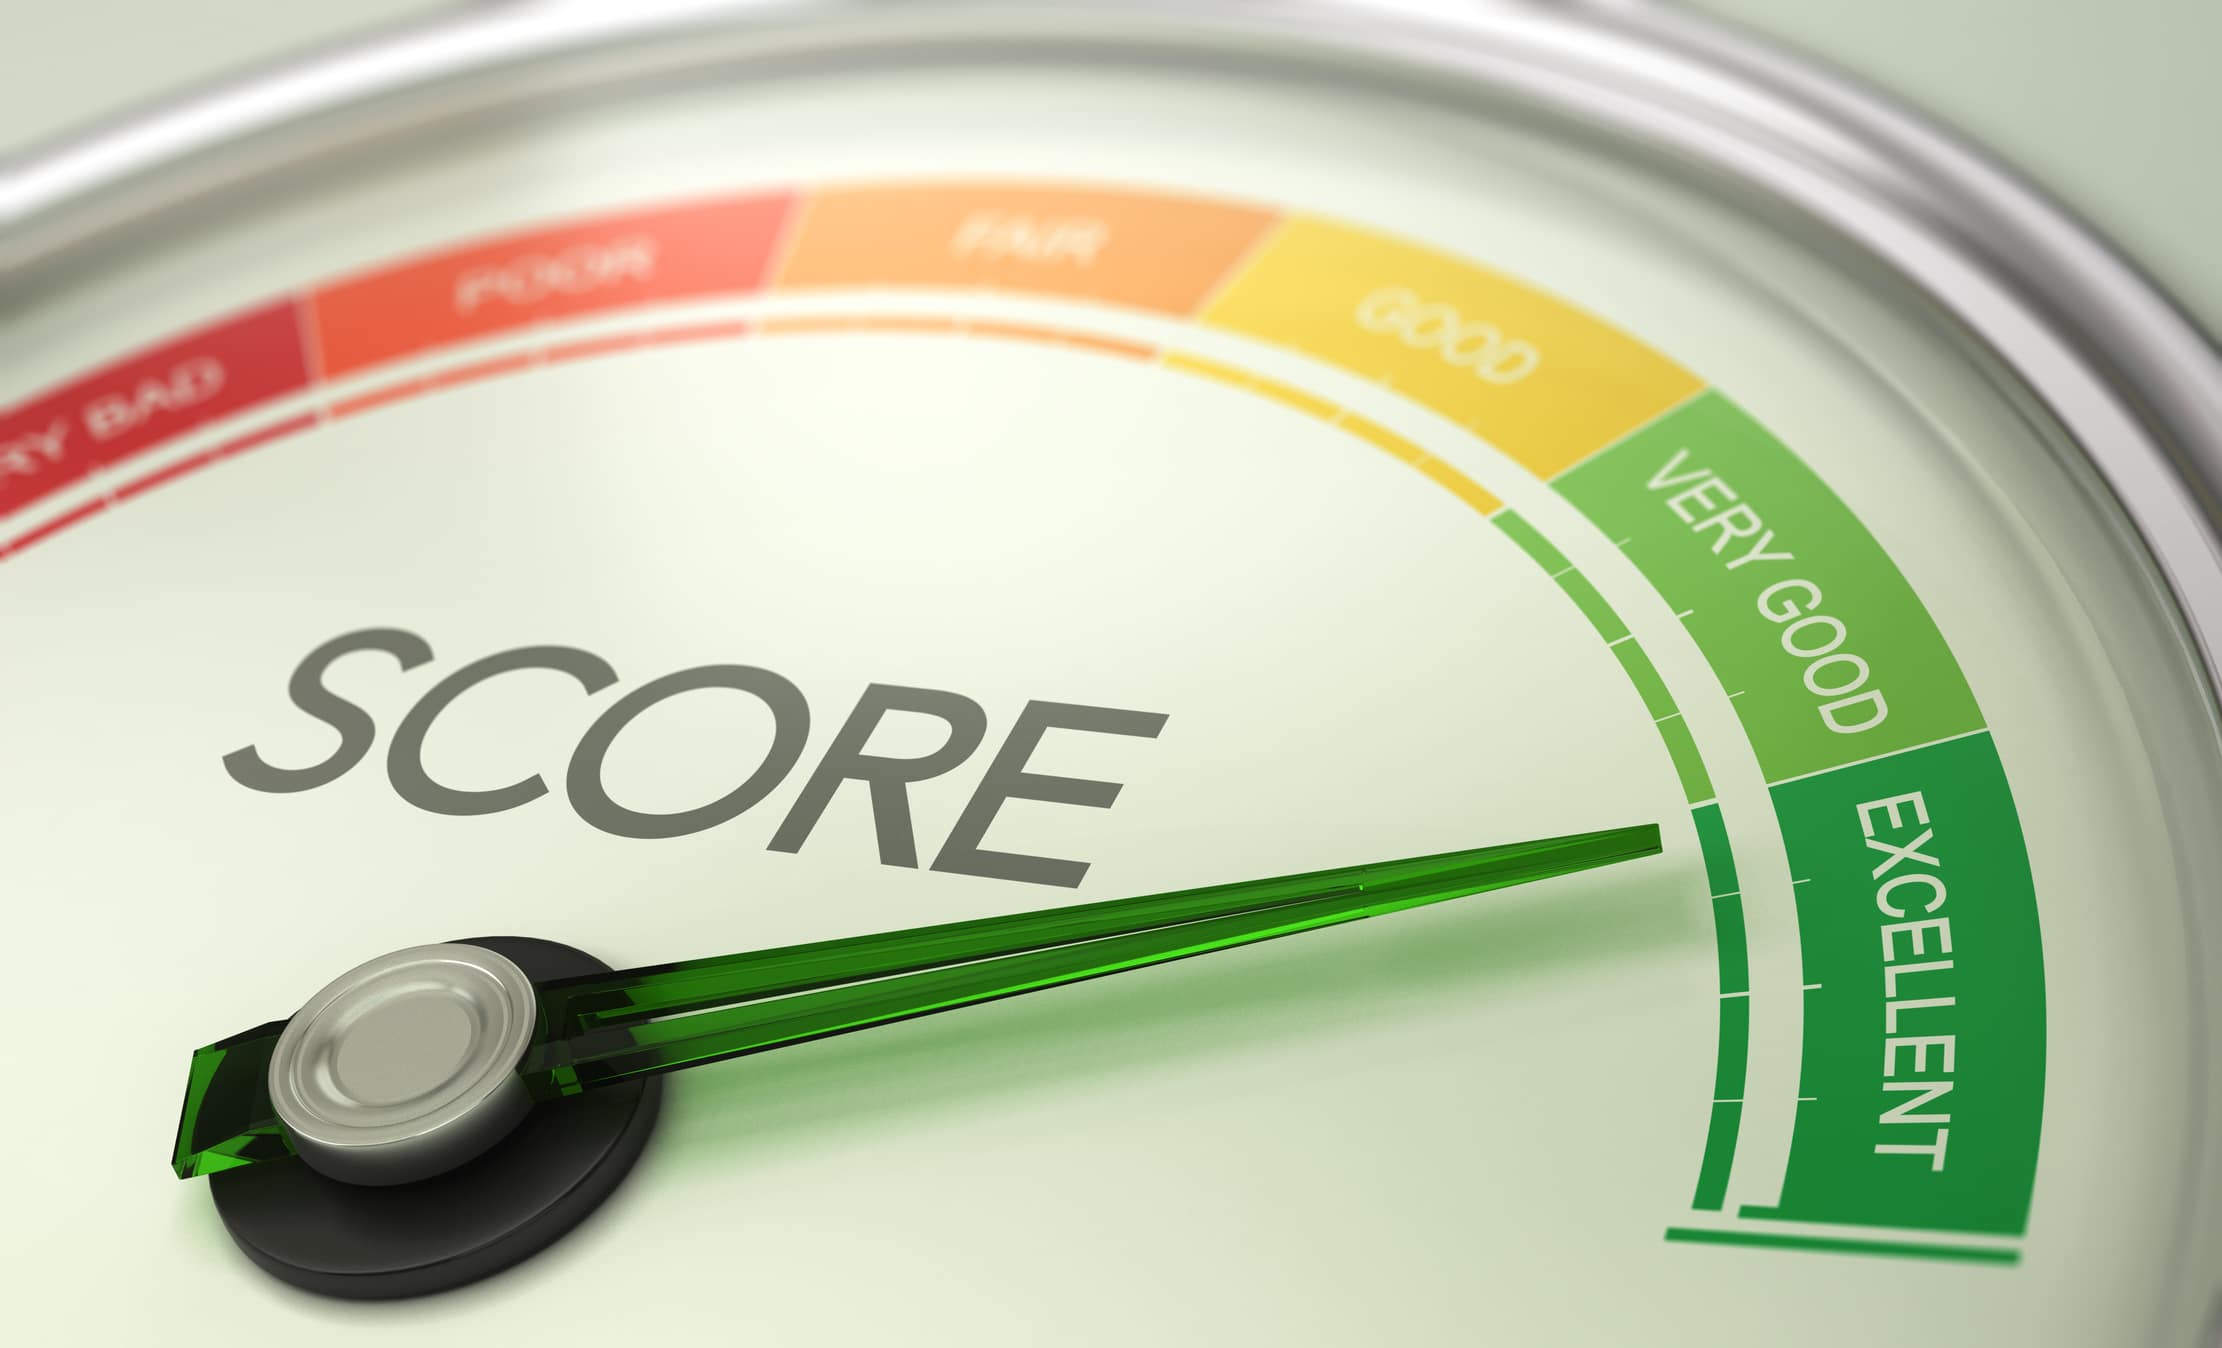 perfect credit score. 3D illustration of a conceptual gauge with needle pointing to excellent. Business credit score concept.